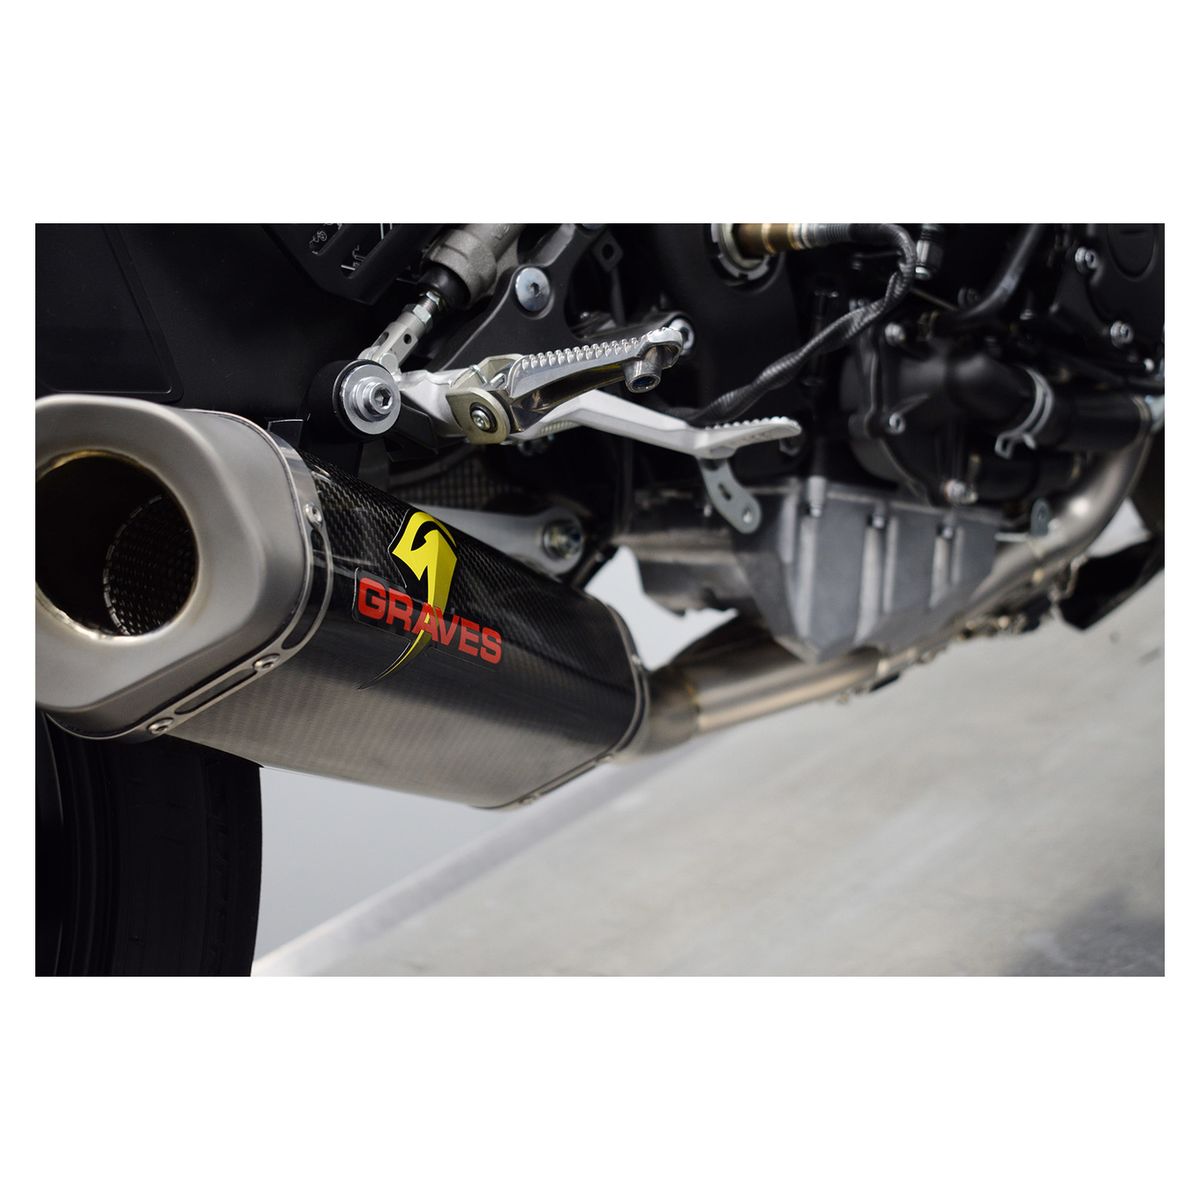 Graves Works 7 Exhaust System for Yamaha R6